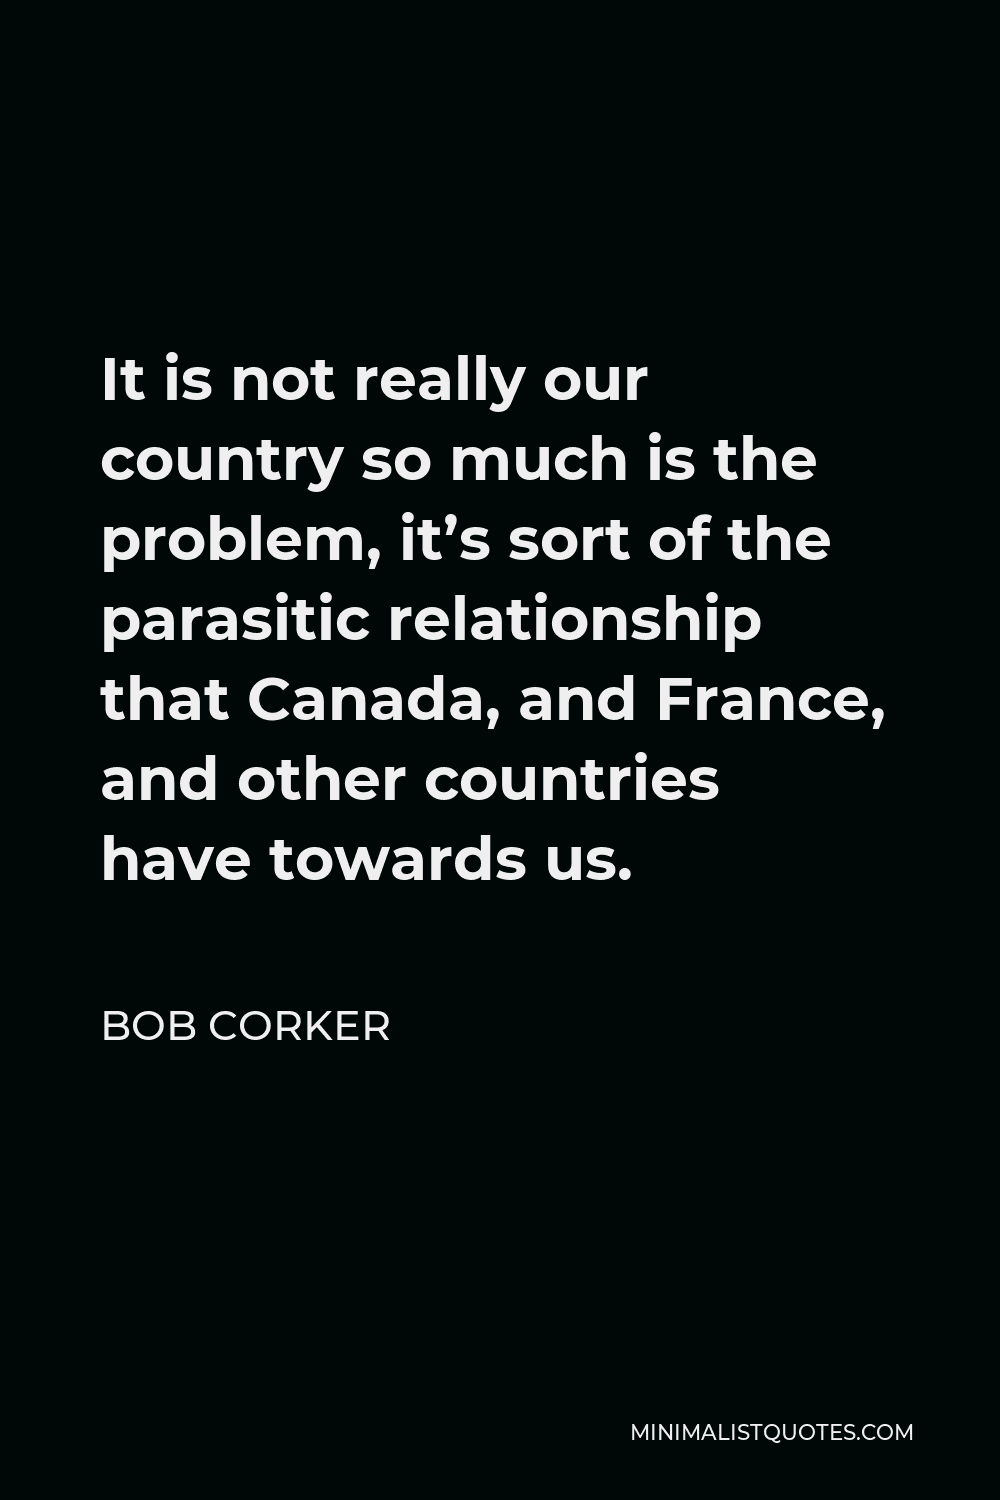 Bob Corker Quote - It is not really our country so much is the problem, it’s sort of the parasitic relationship that Canada, and France, and other countries have towards us.